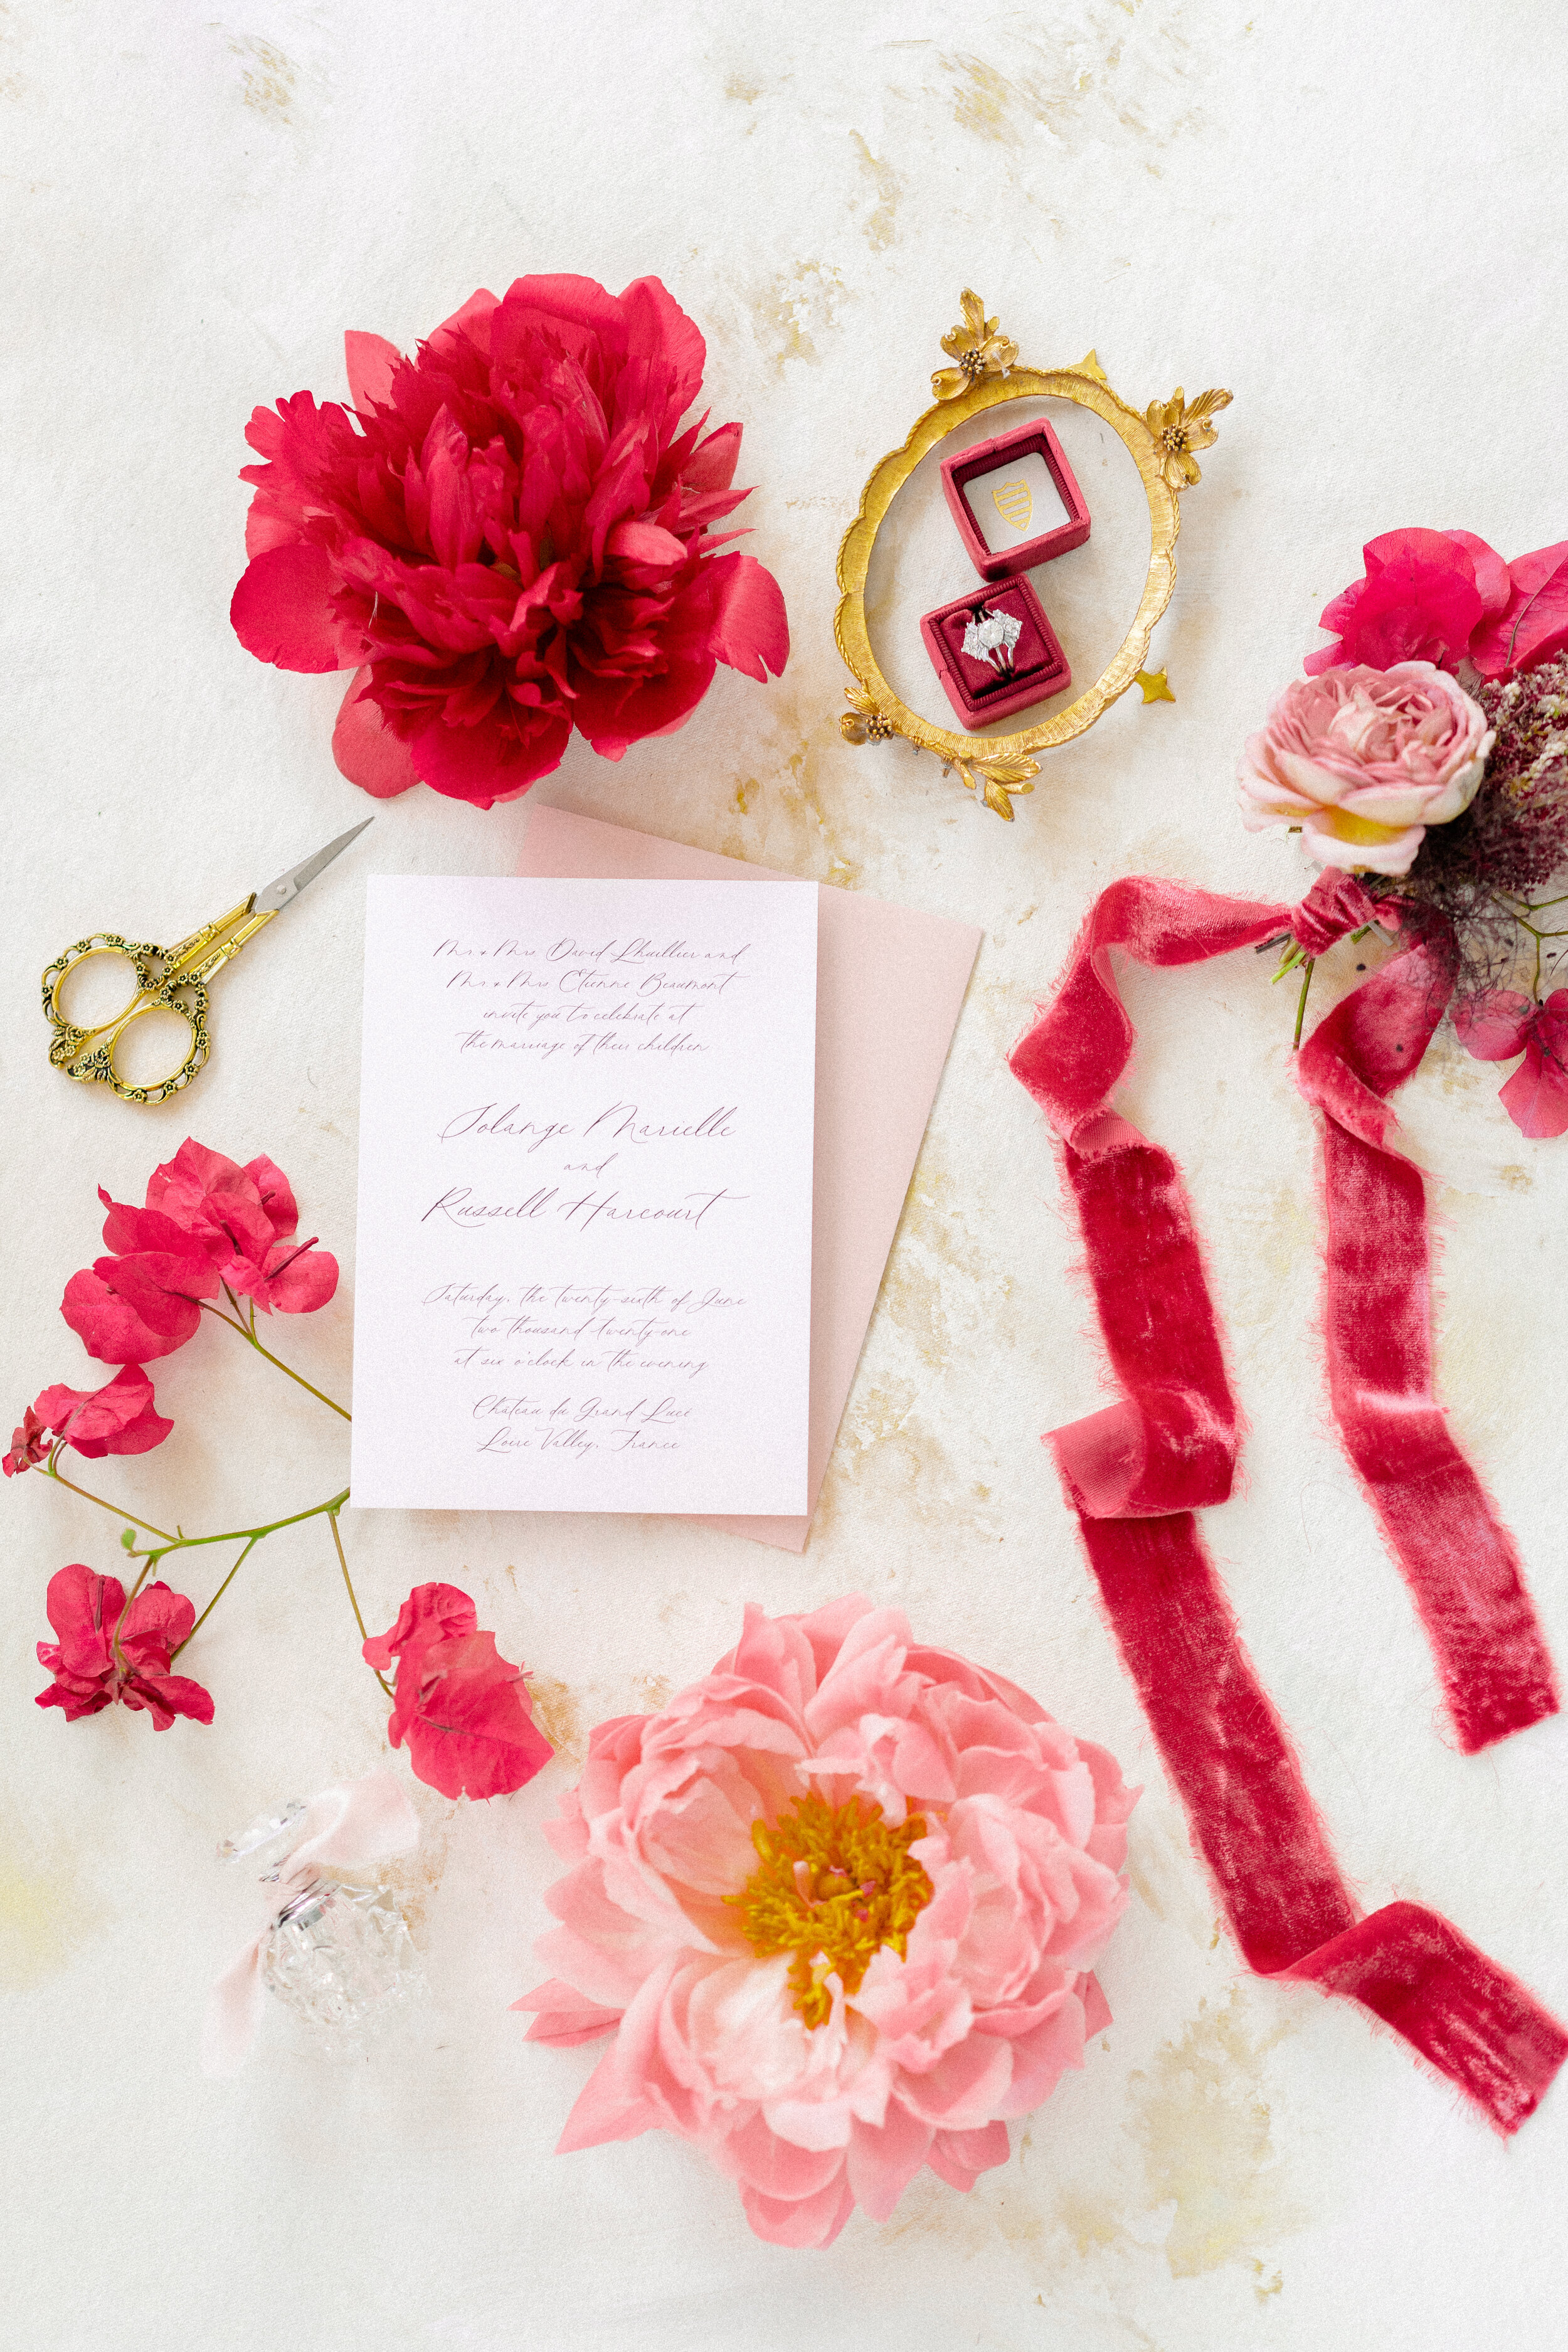 A Romantic Wedding Elopement Filled with Colorful Fuchsia - Sarahi Hadden Submission-105.jpg